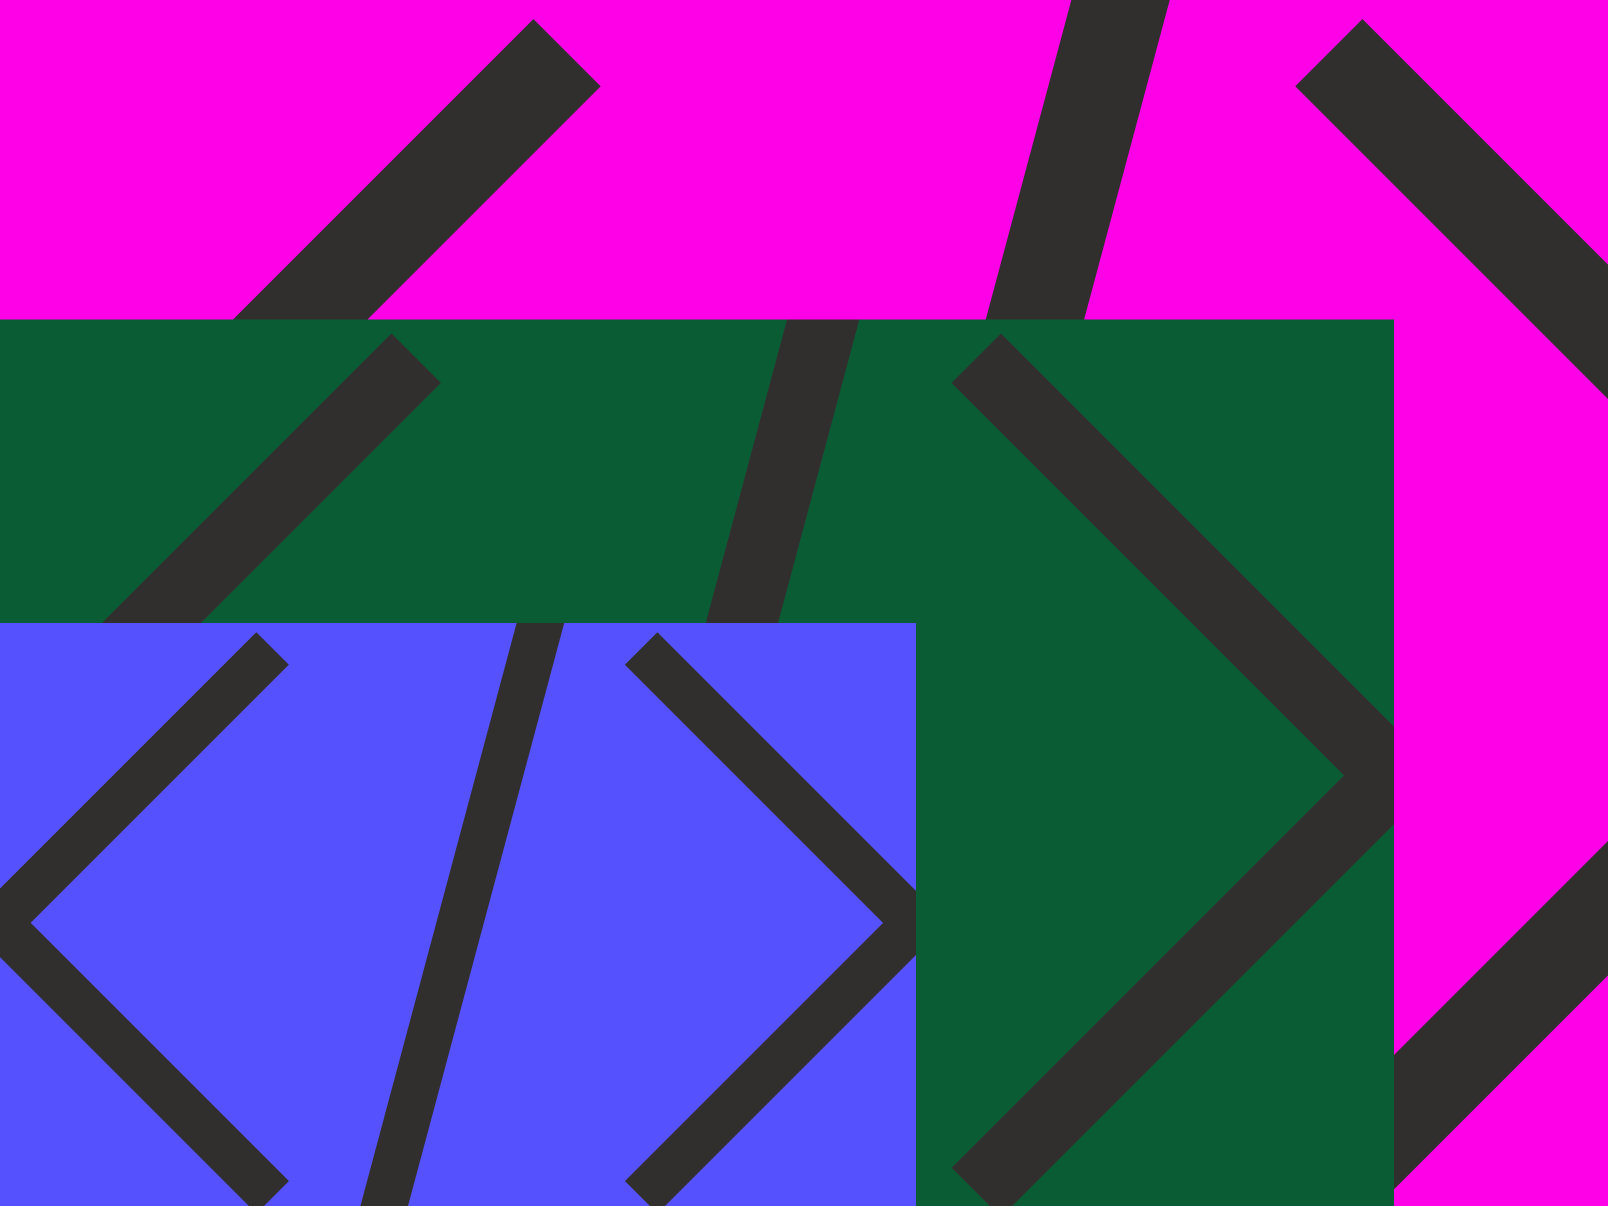 An abstract graphic with fuscia, green, and blue rectangles and a code symbol